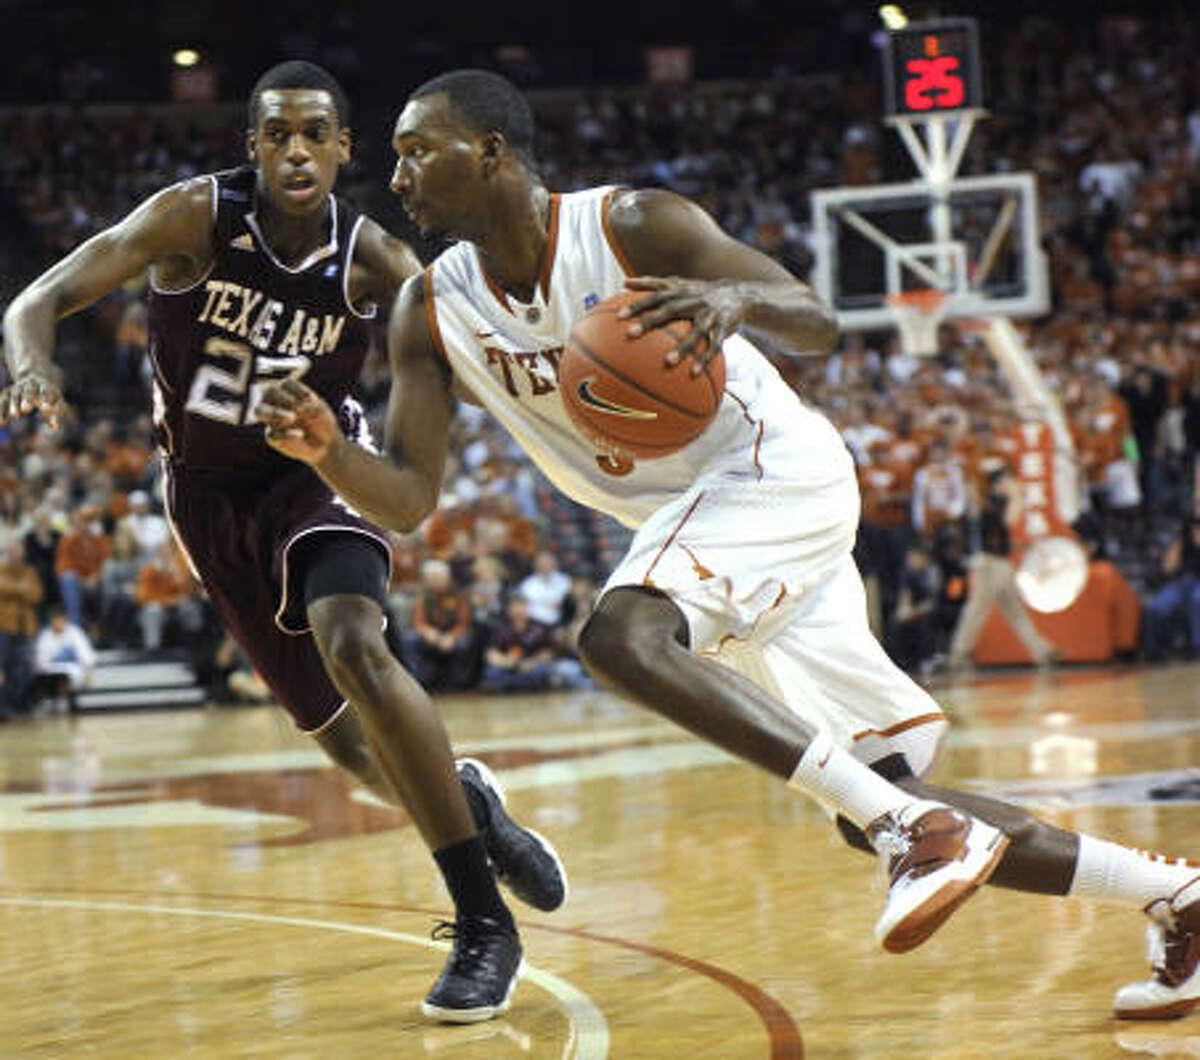 Jan. 19: Texas 81, Texas A&M 60 Texas forward Jordan Hamilton, right, drives around Texas A&M forward Khris Middleton during the second half of Wednesday night's game in Austin. Hamilton scored a game-high 27 points on 10-of-14 shooting.